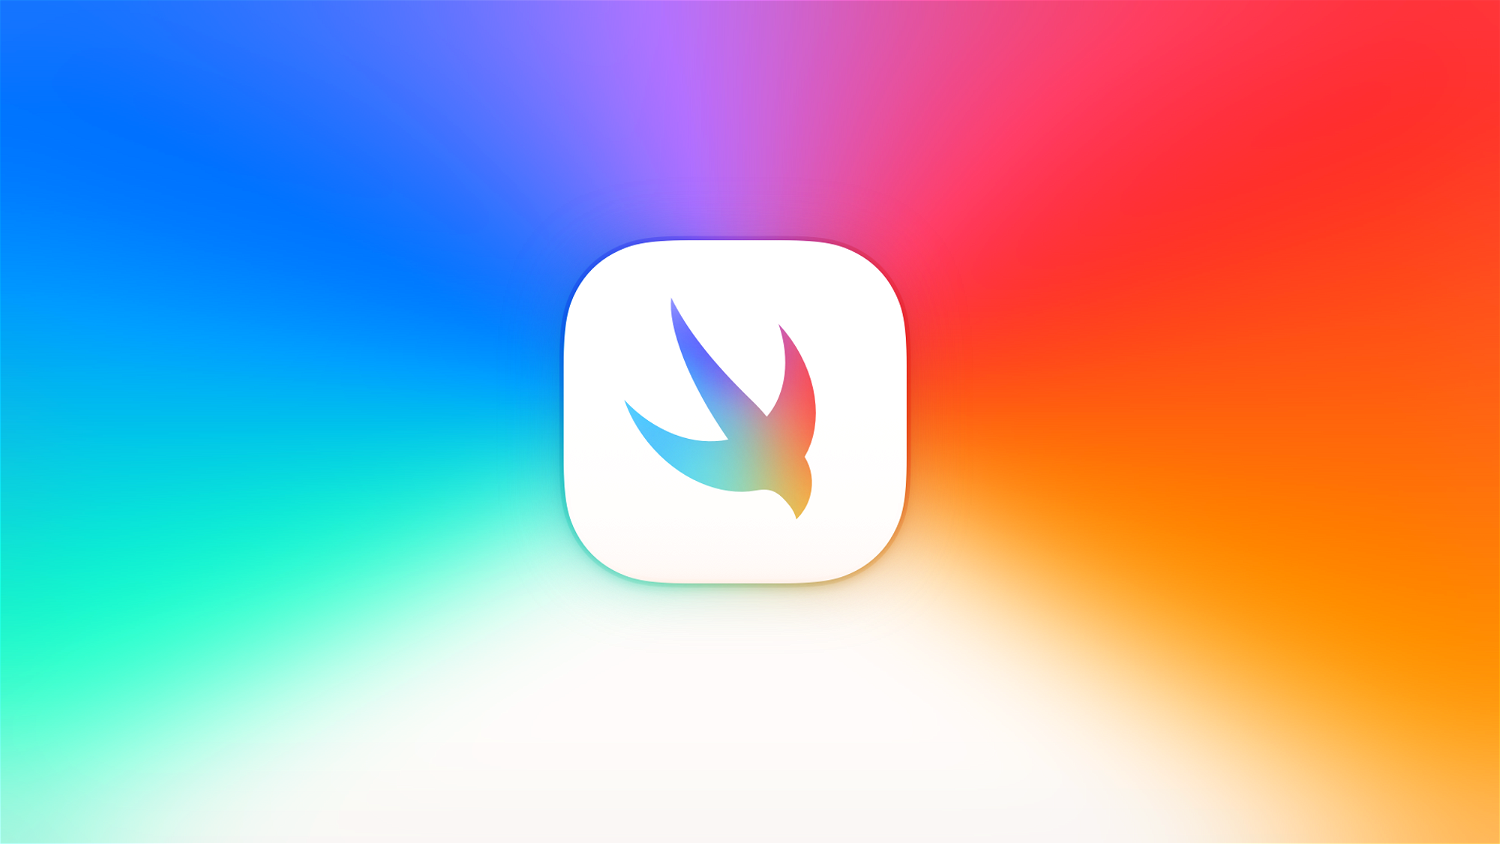 A Designer's Guide to SwiftUI